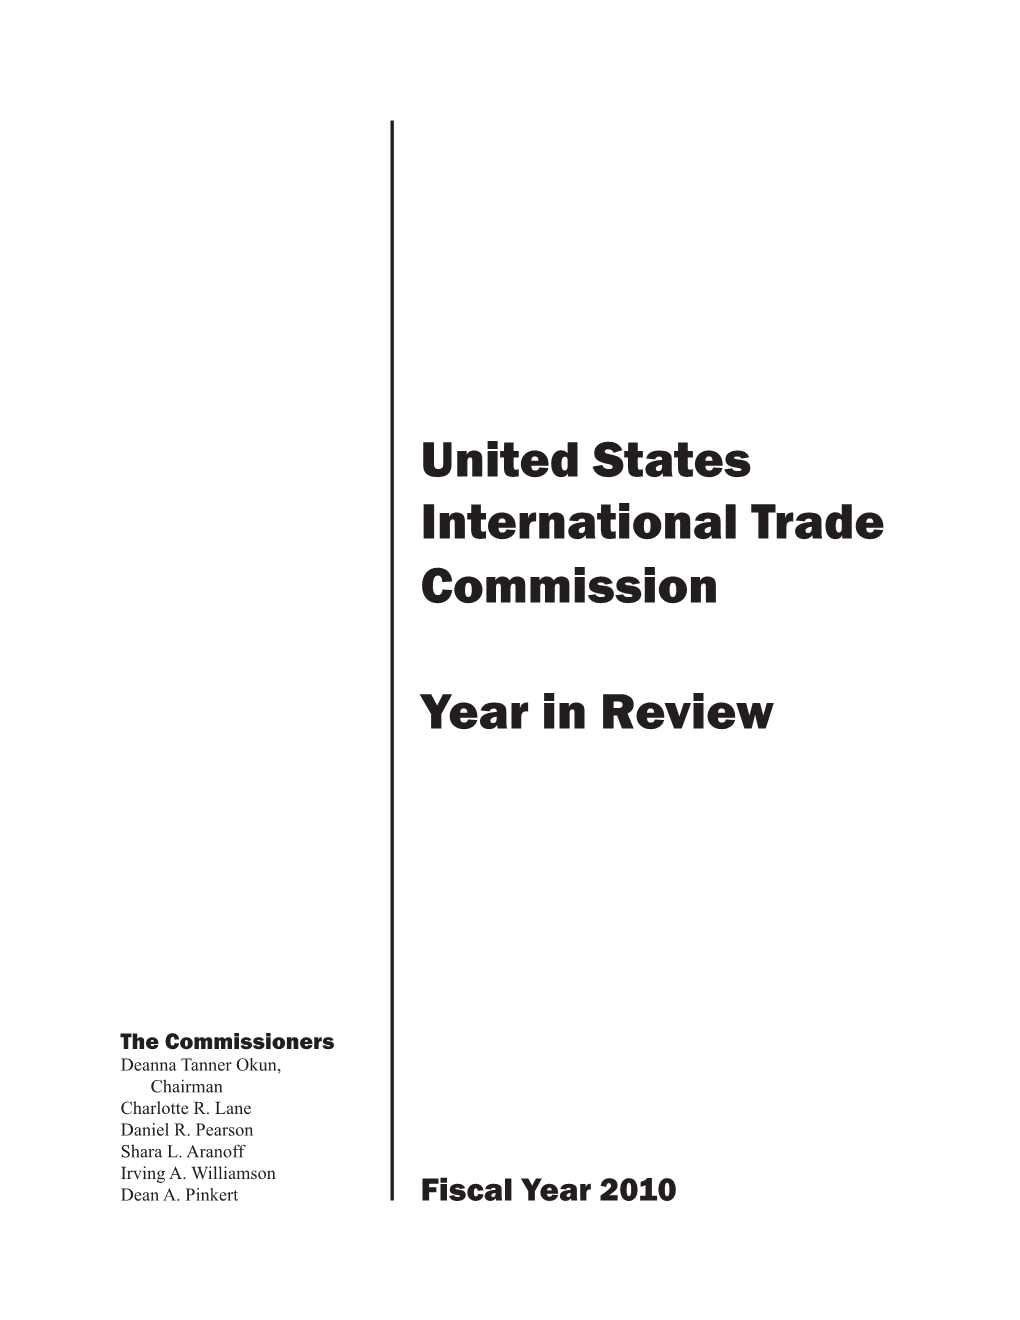 United States International Trade Commission Year in Review